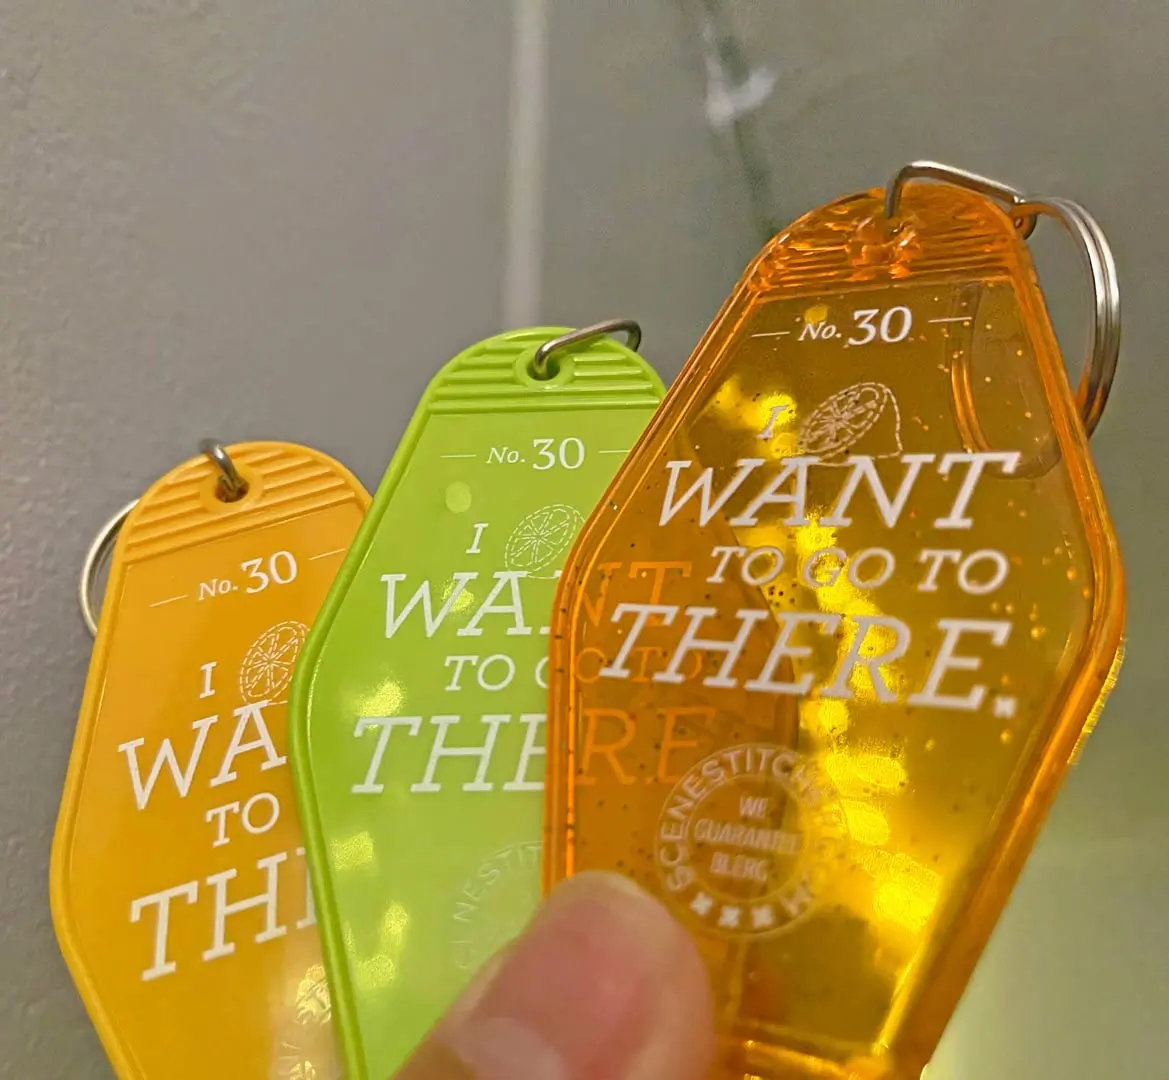 Key tags in three colors with “30 Rock” quote “I want to go to there.” and “No. 30” at top of design